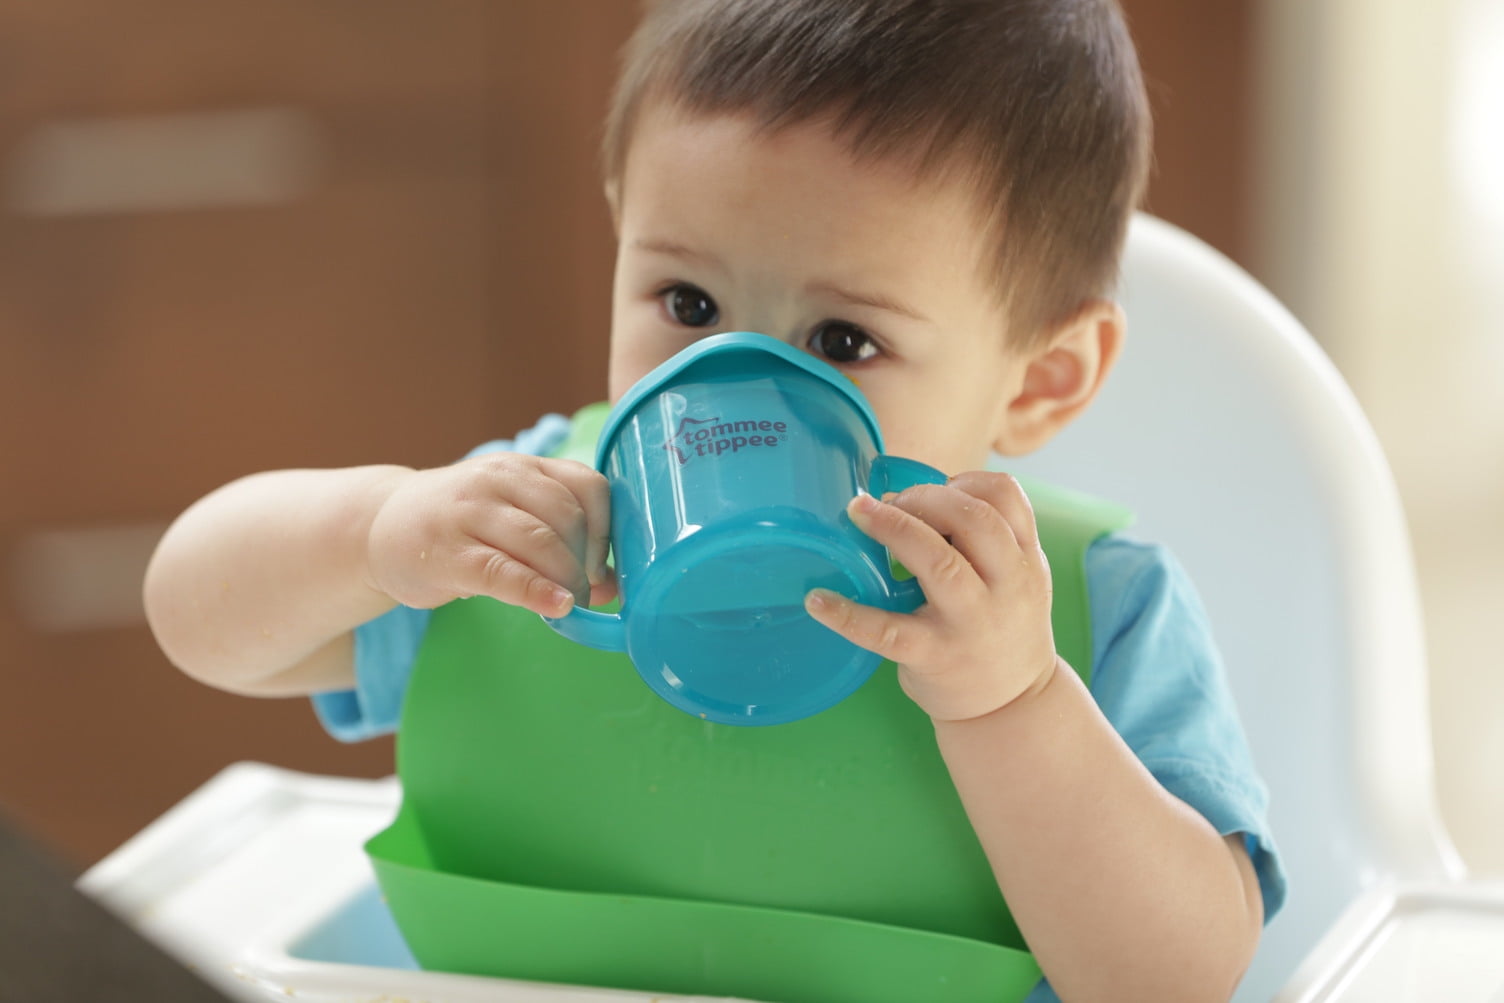 tommee tippee silicone bib